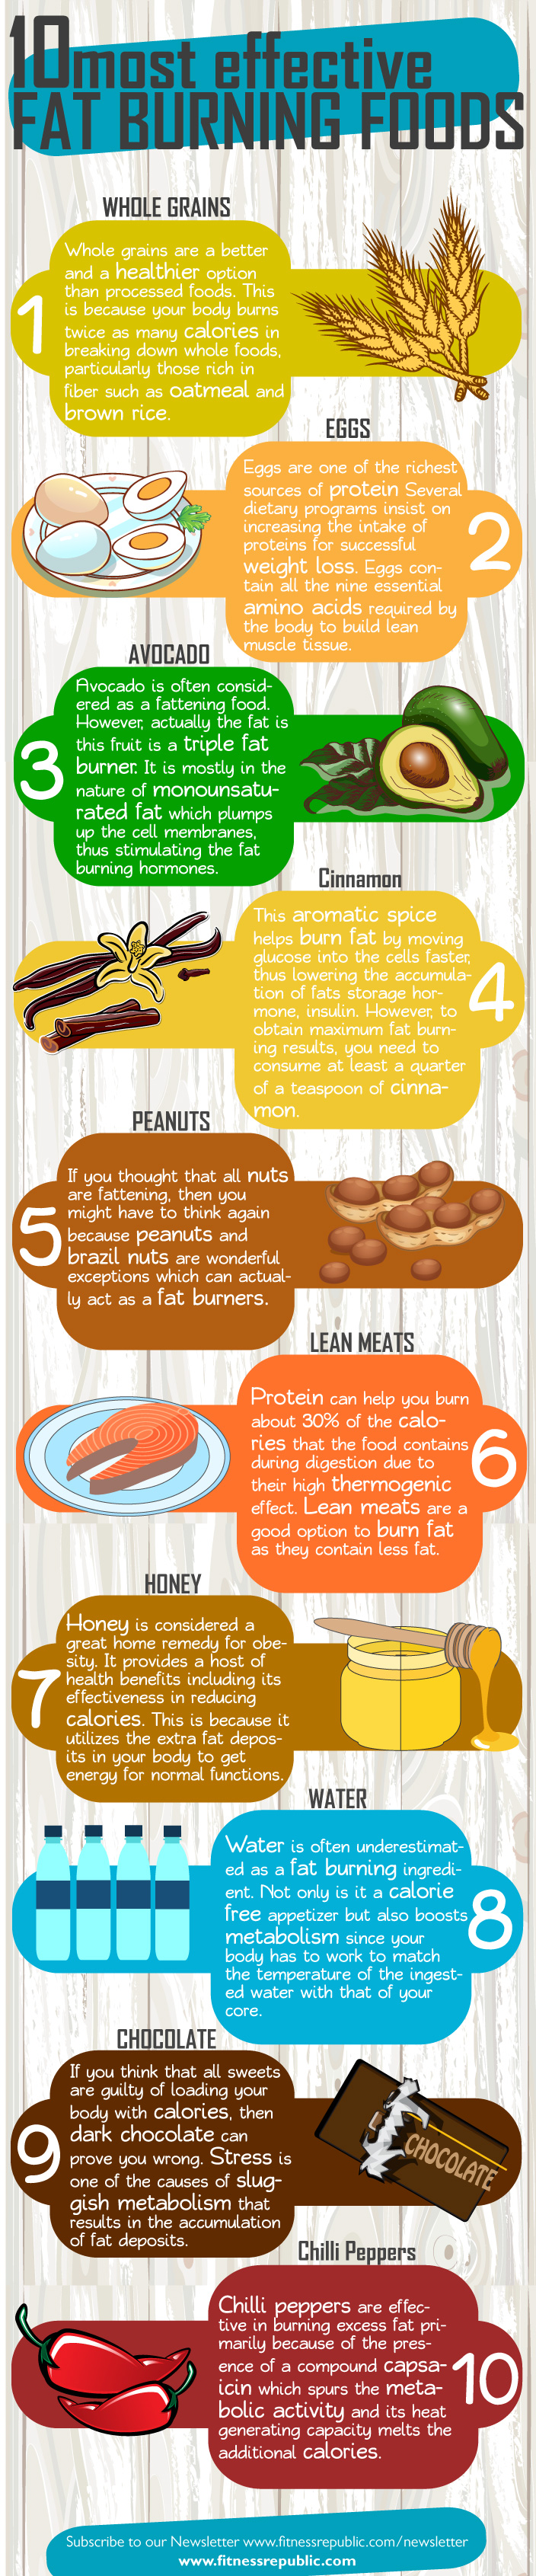 10 Most Effective Fat Burning Foods [Infographic]